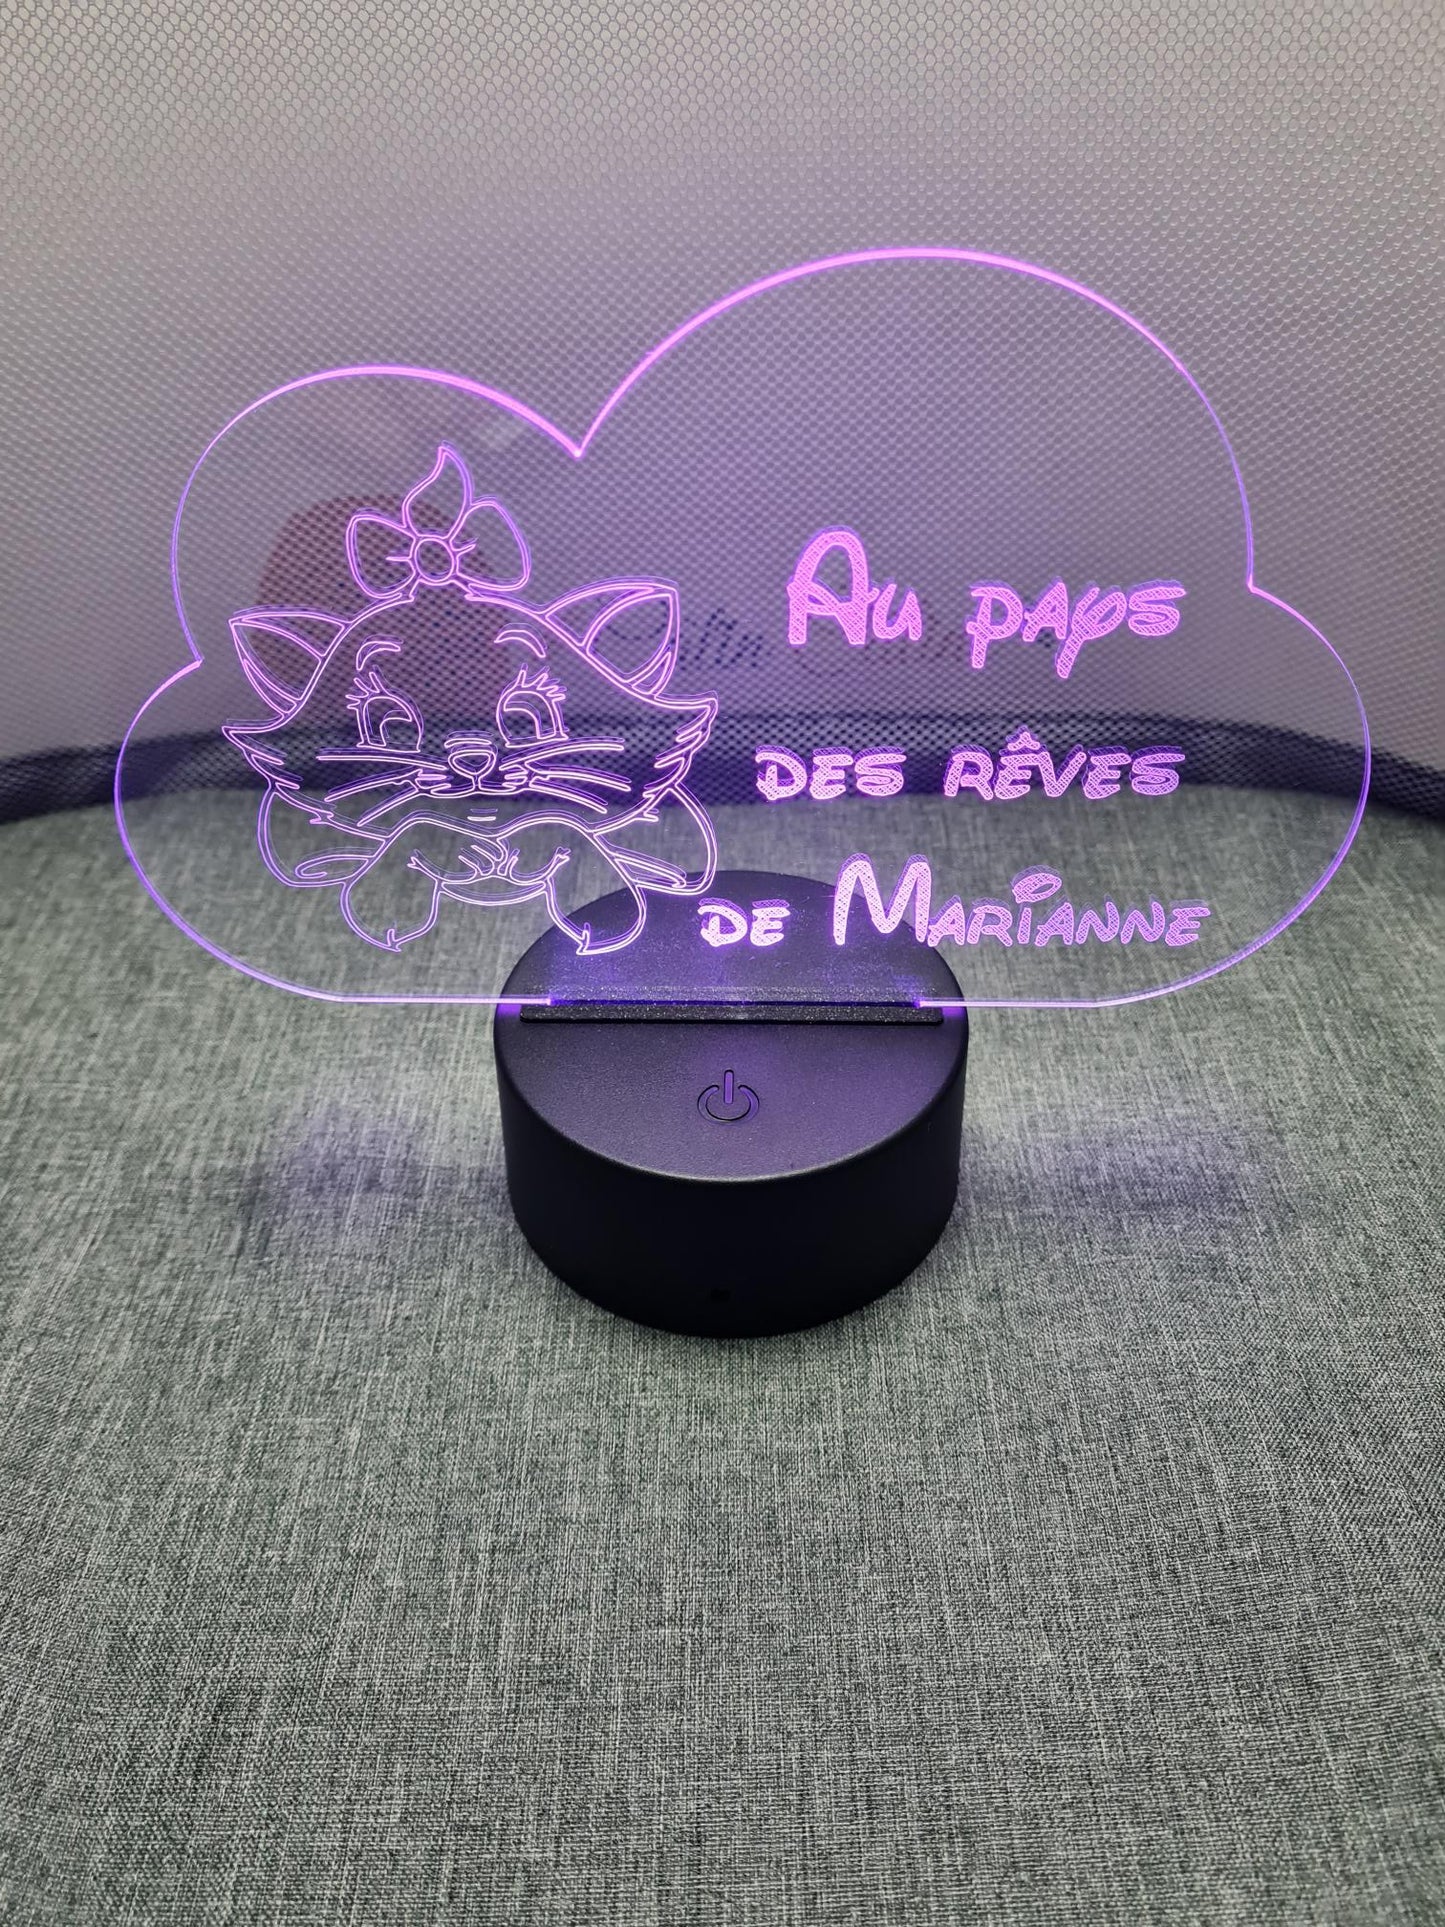 Personalized children's LED night light with first name and character - Calincaline.be